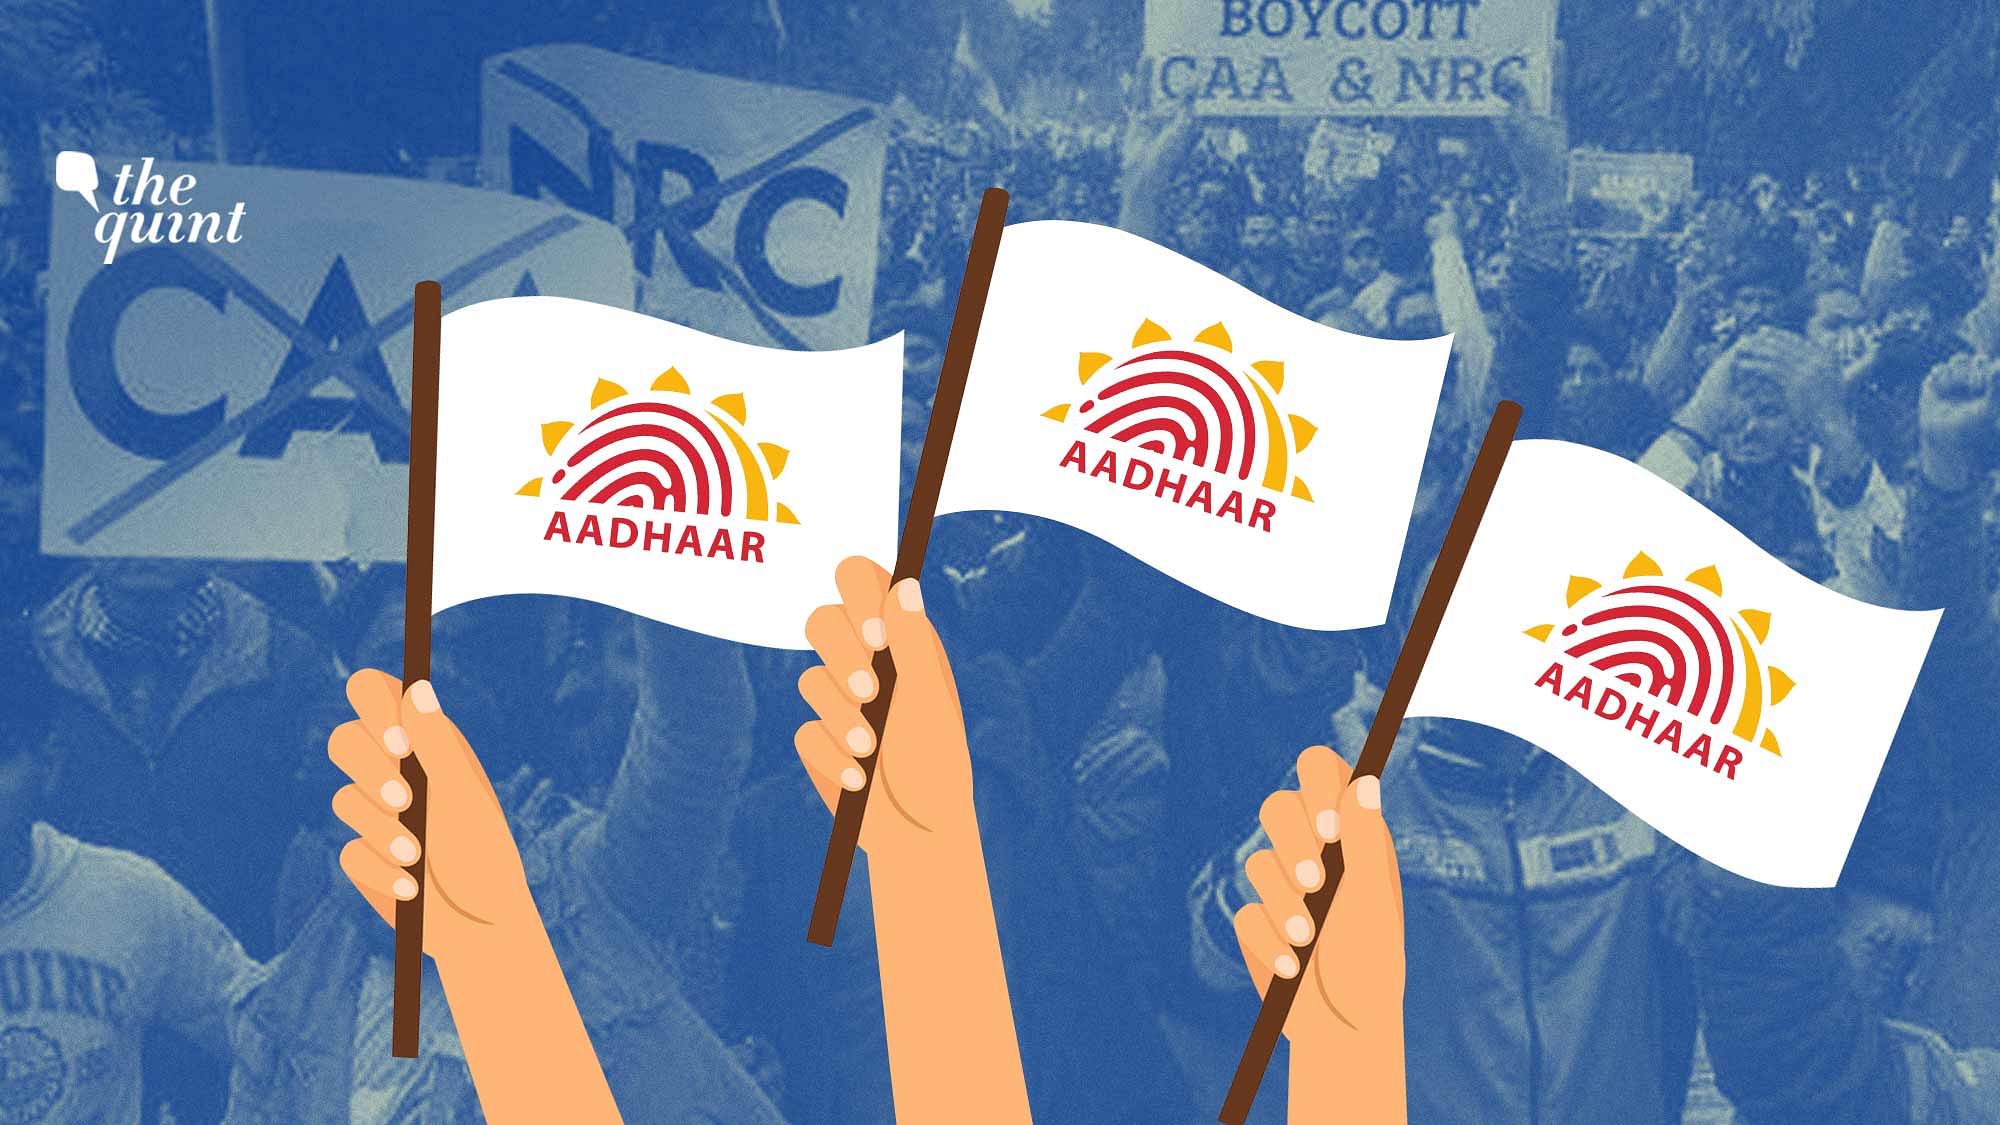 The UIDAI, in its letter dated 3 February, has stated that it has received “complaint/allegation” that the accused have “obtained Aadhaar through false pretenses, making false claims and submitting false documents.”